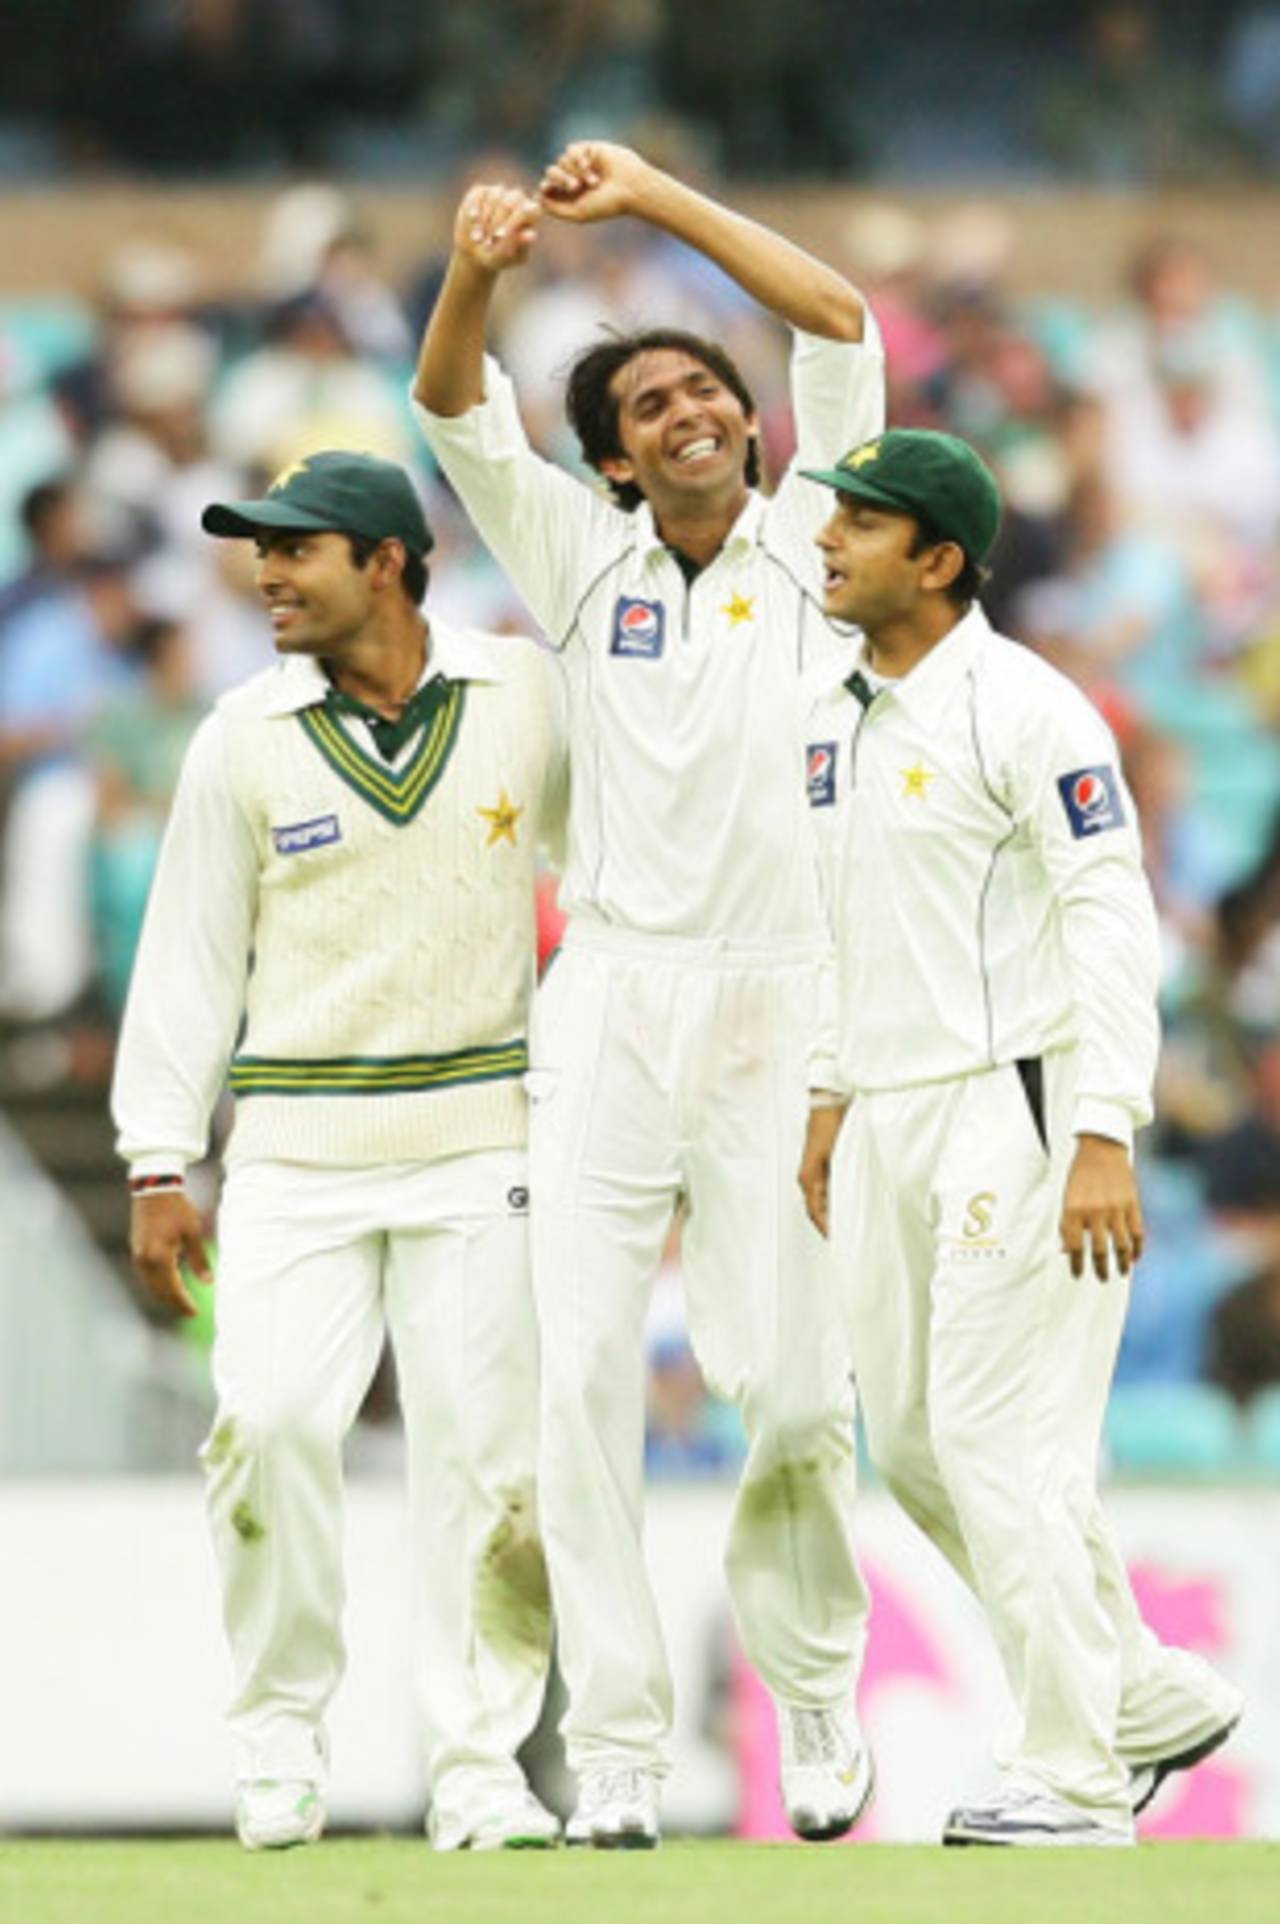 Mohammad Asif is congratulated on one of his six wickets, Australia v Pakistan, 2nd Test, Sydney, 1st day, January 3, 2010